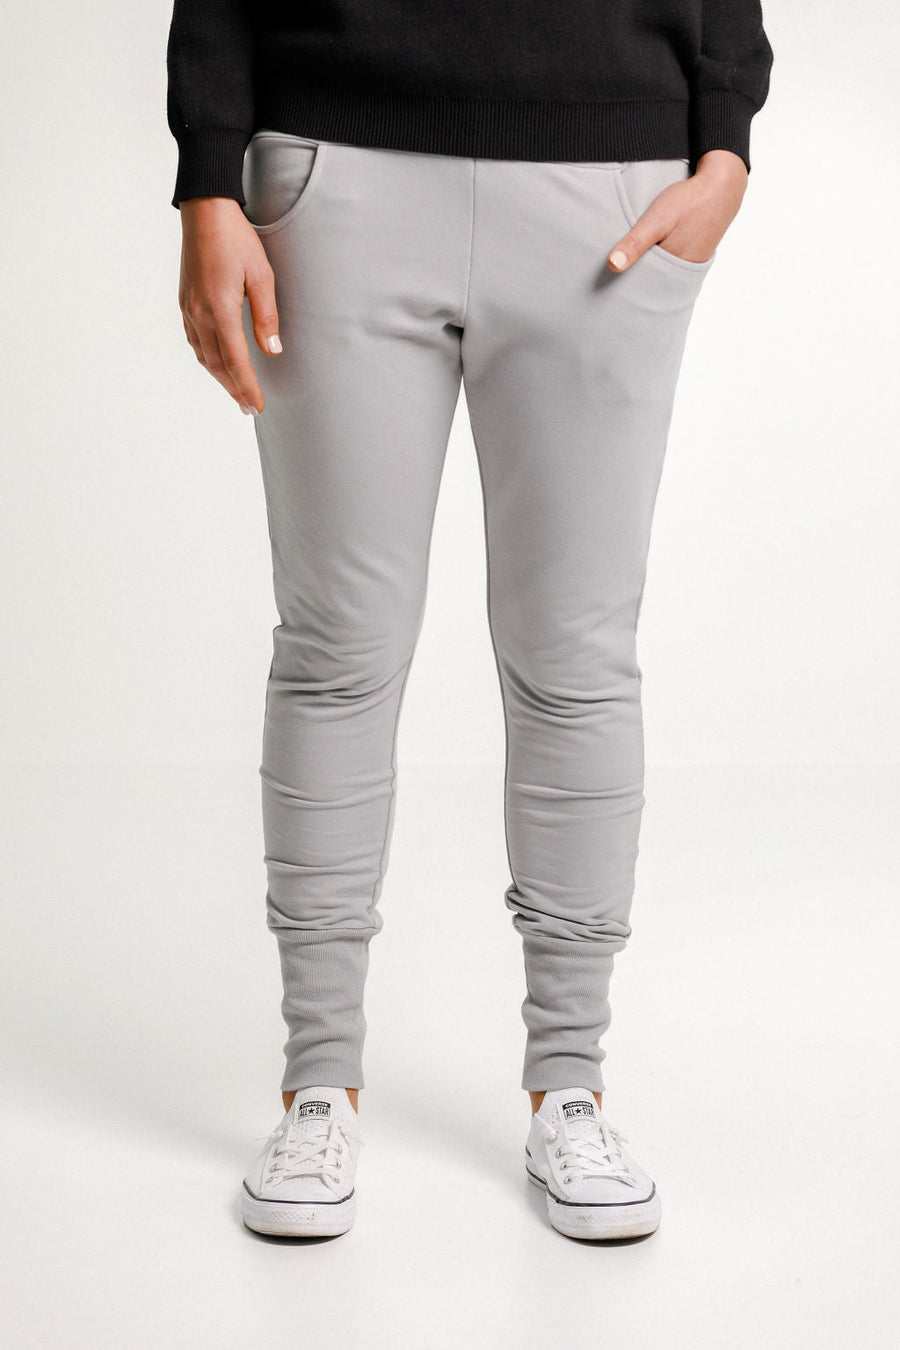 HOMELEE WINTER APARTMENT PANTS - PEWTER WHITE X